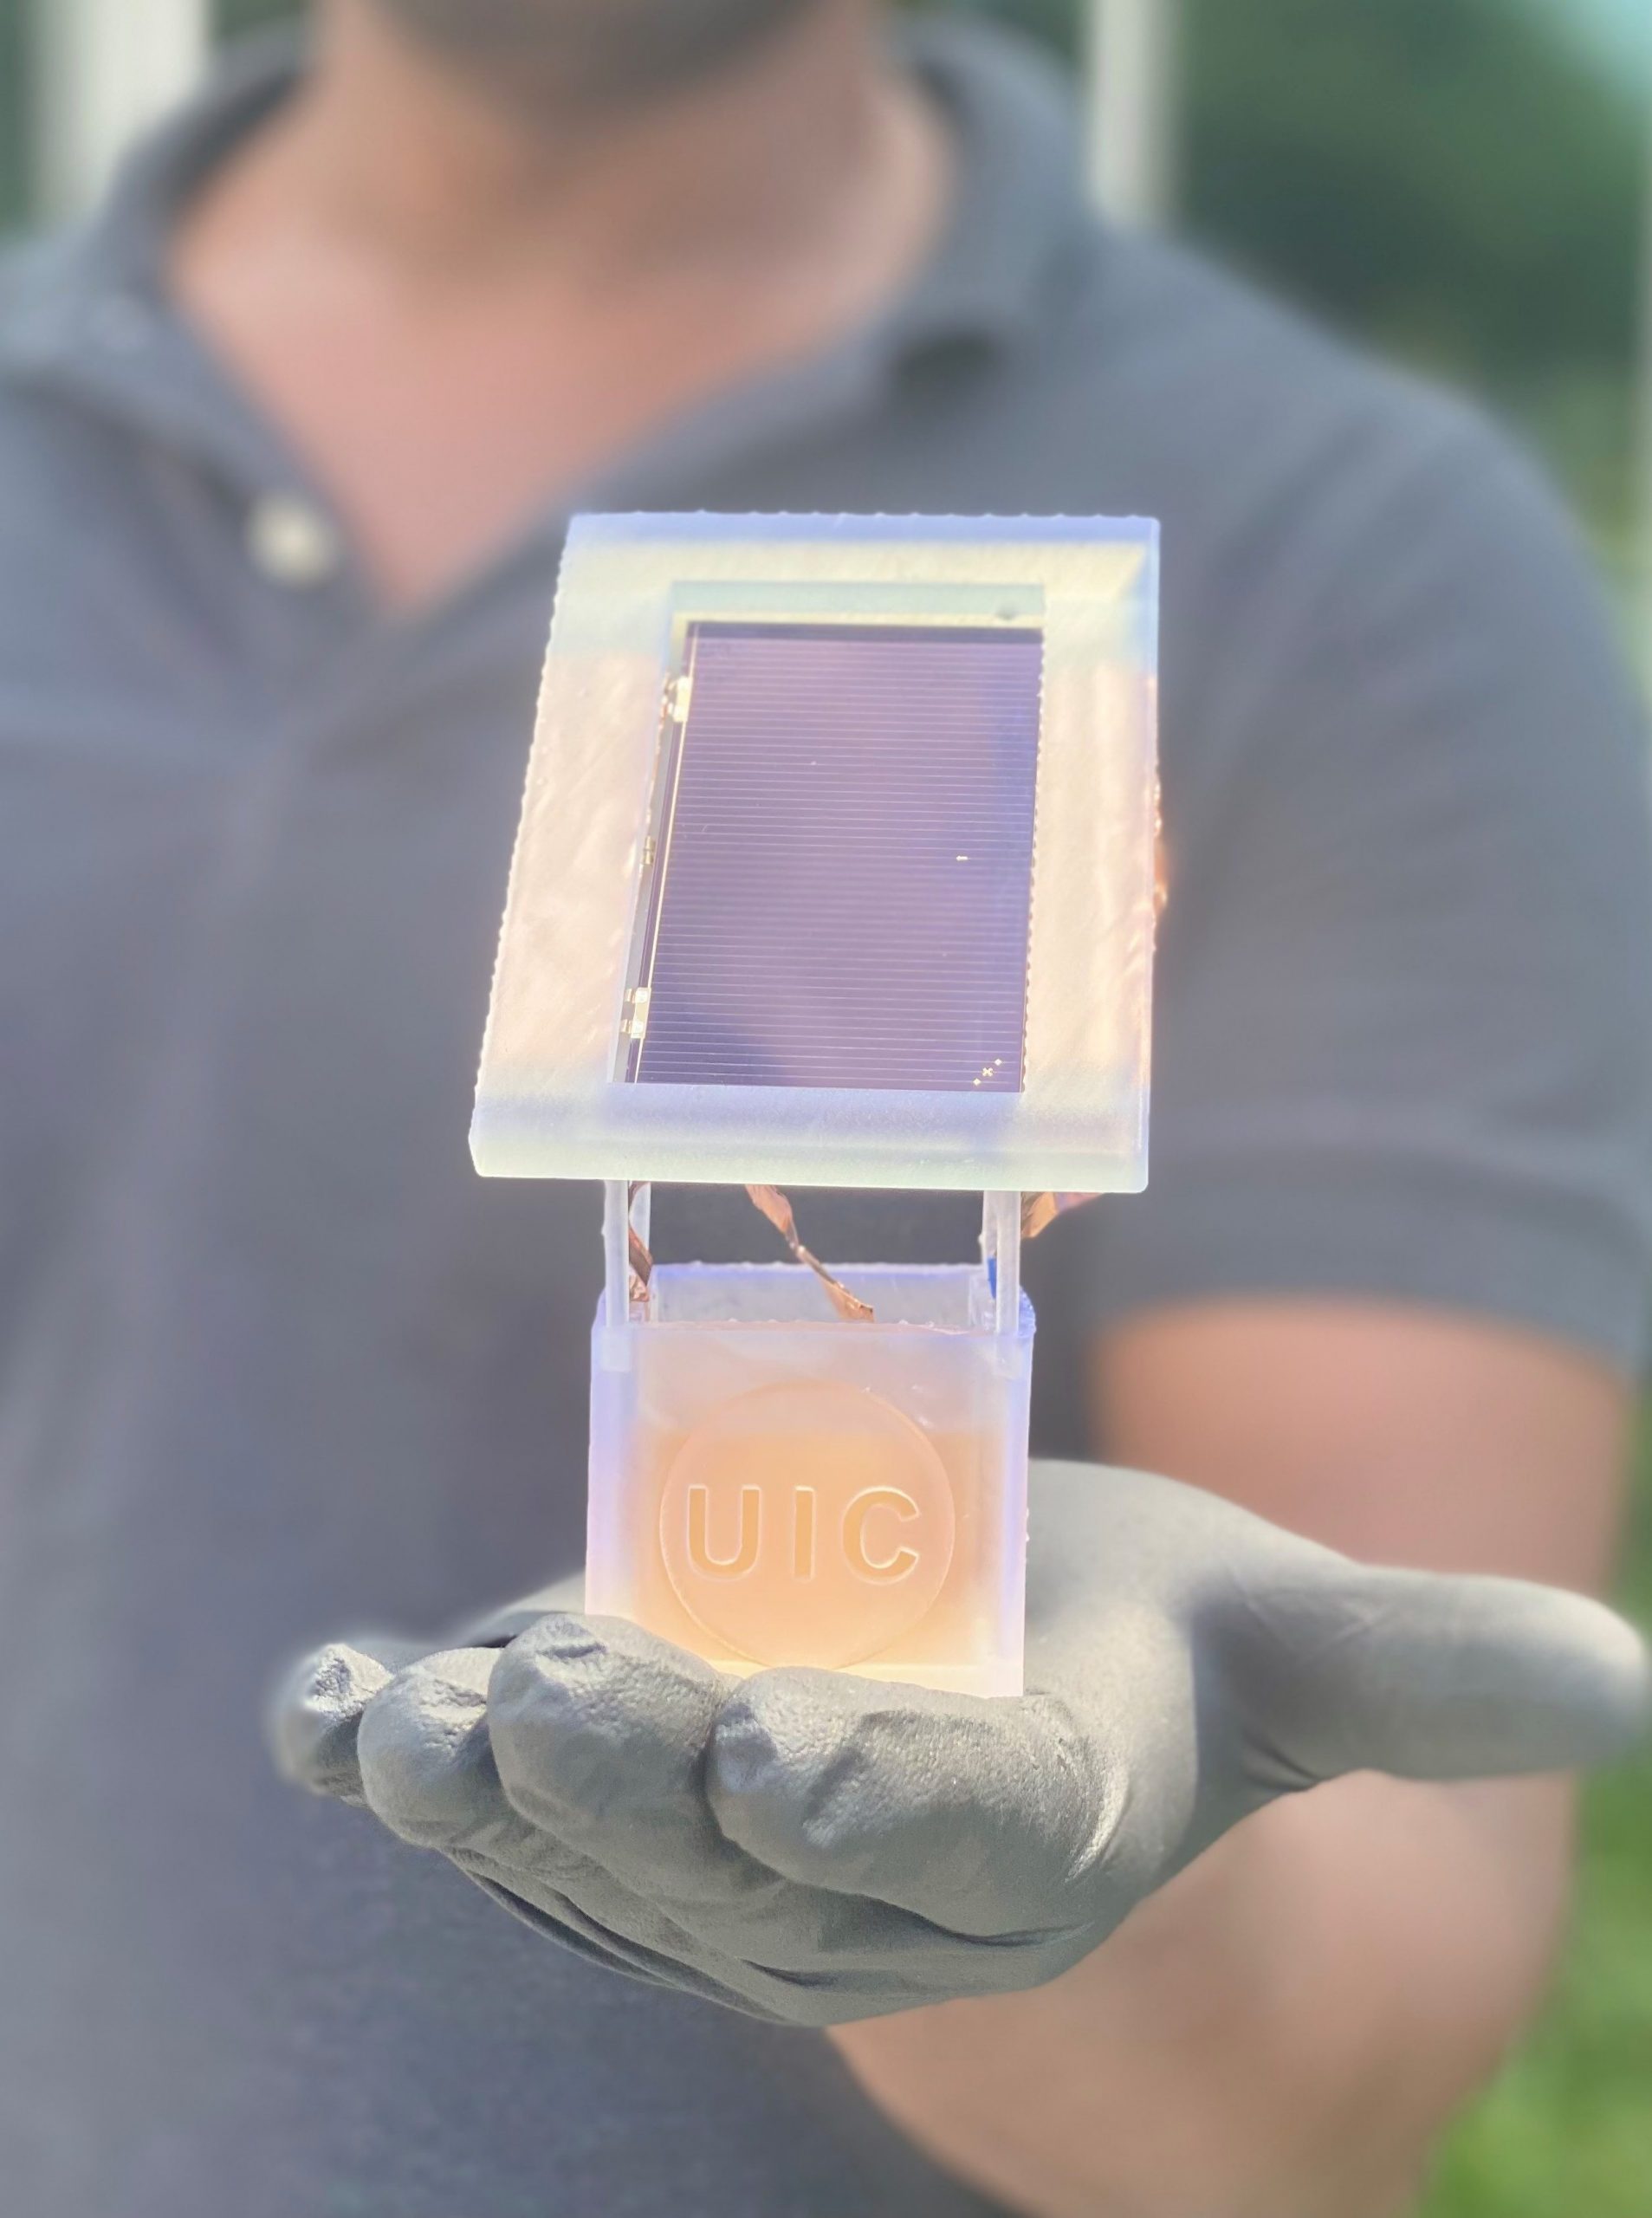 A scientists holds an electrochemical circuit in which a solar cell is attached to a well holding a liquid solution. When charged, nitrates from wastewater in the liquid solution are converted to ammonia.